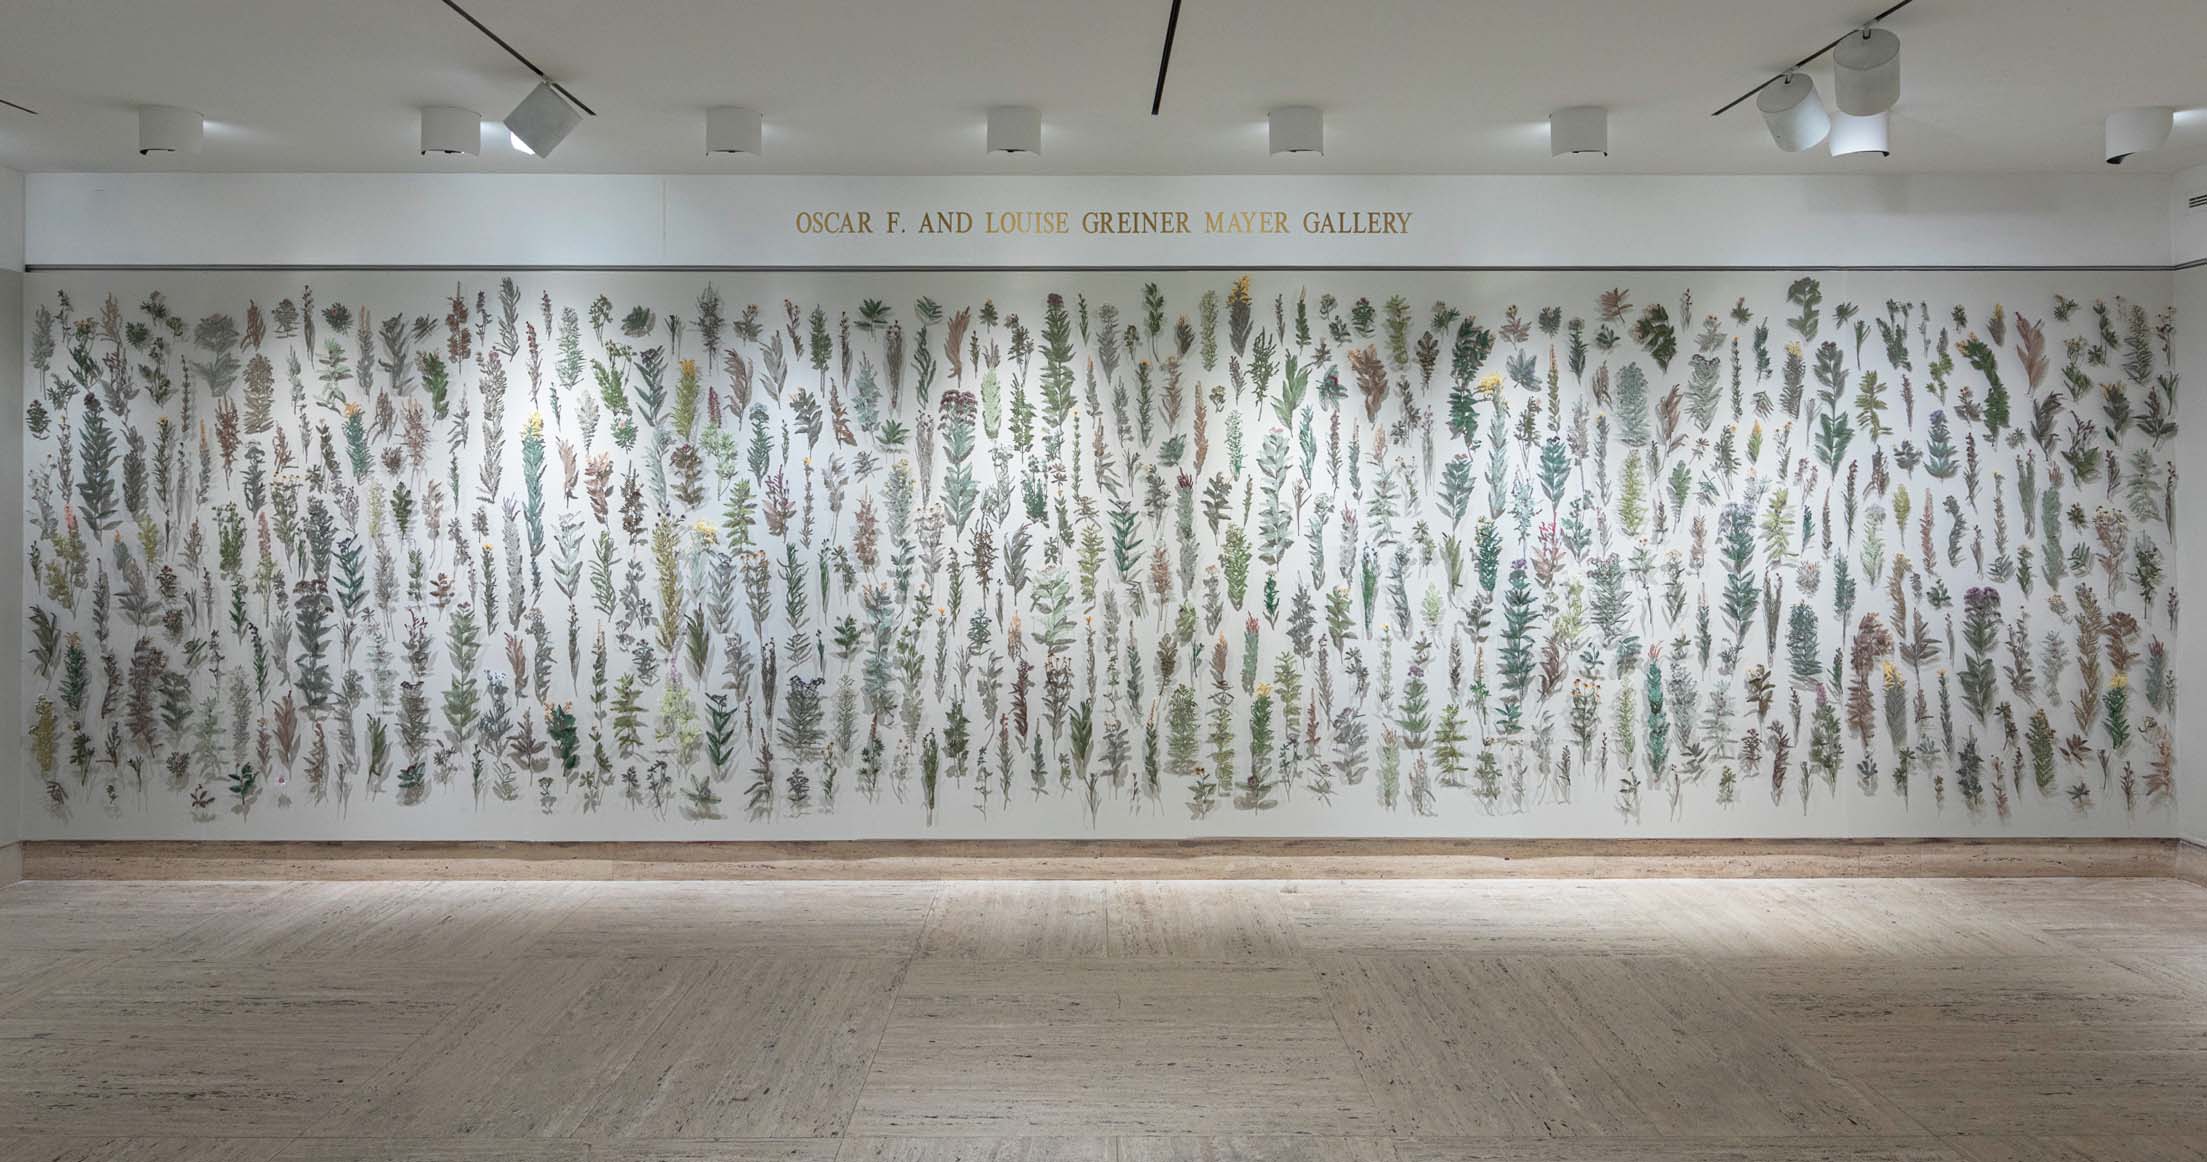 On a white gallery wall, hundreds of thread sketches of plants are mounted in a dense arrangement